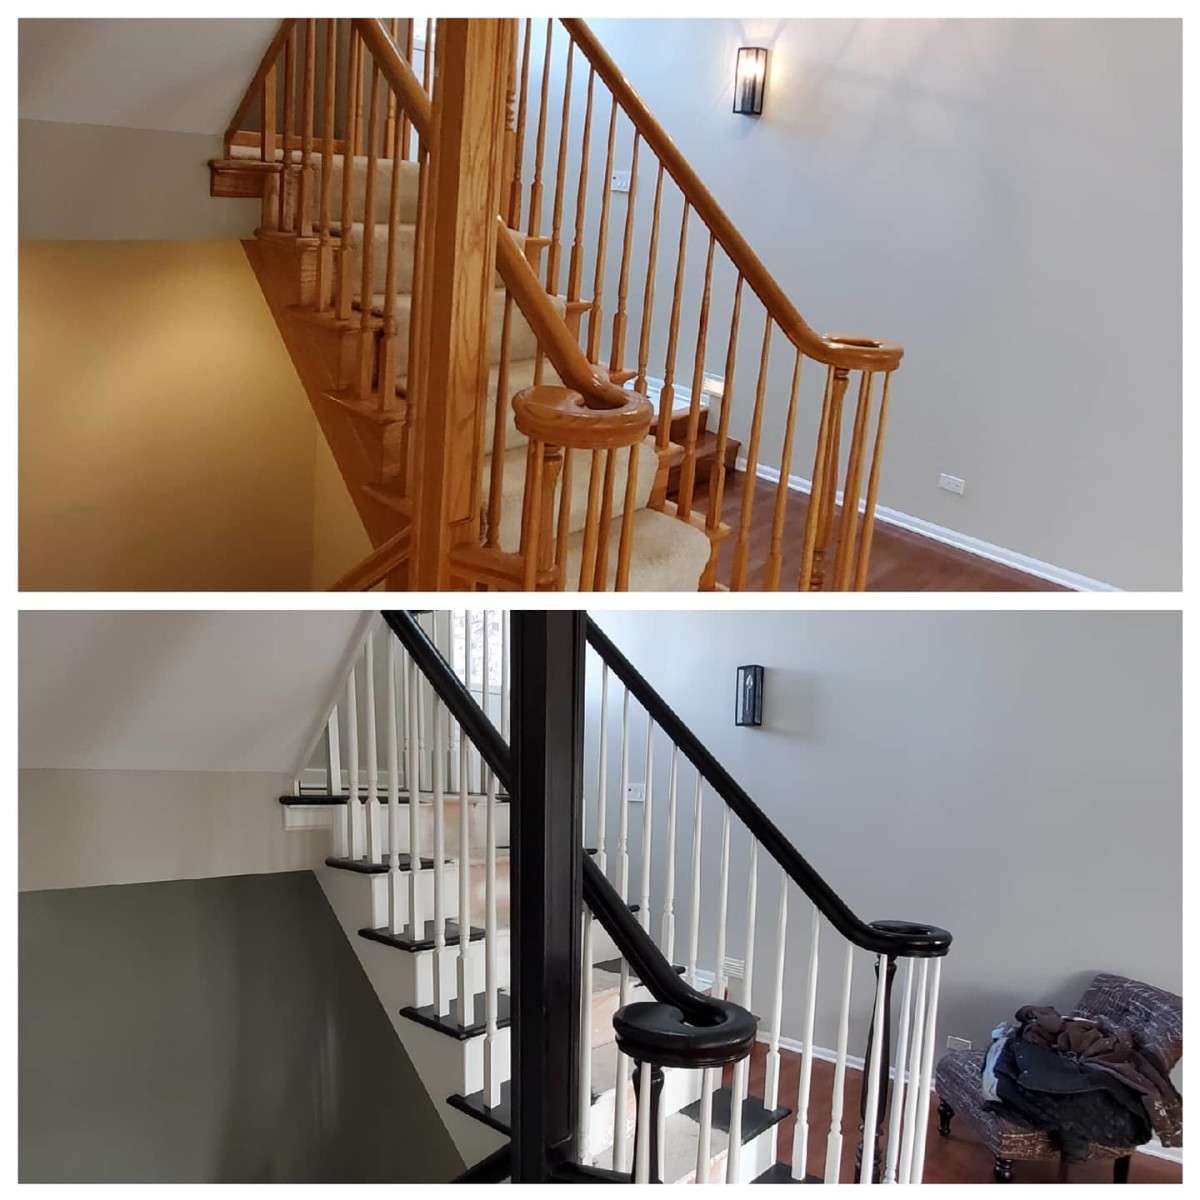 Oak staircase railings and spindles I painted black and white. 